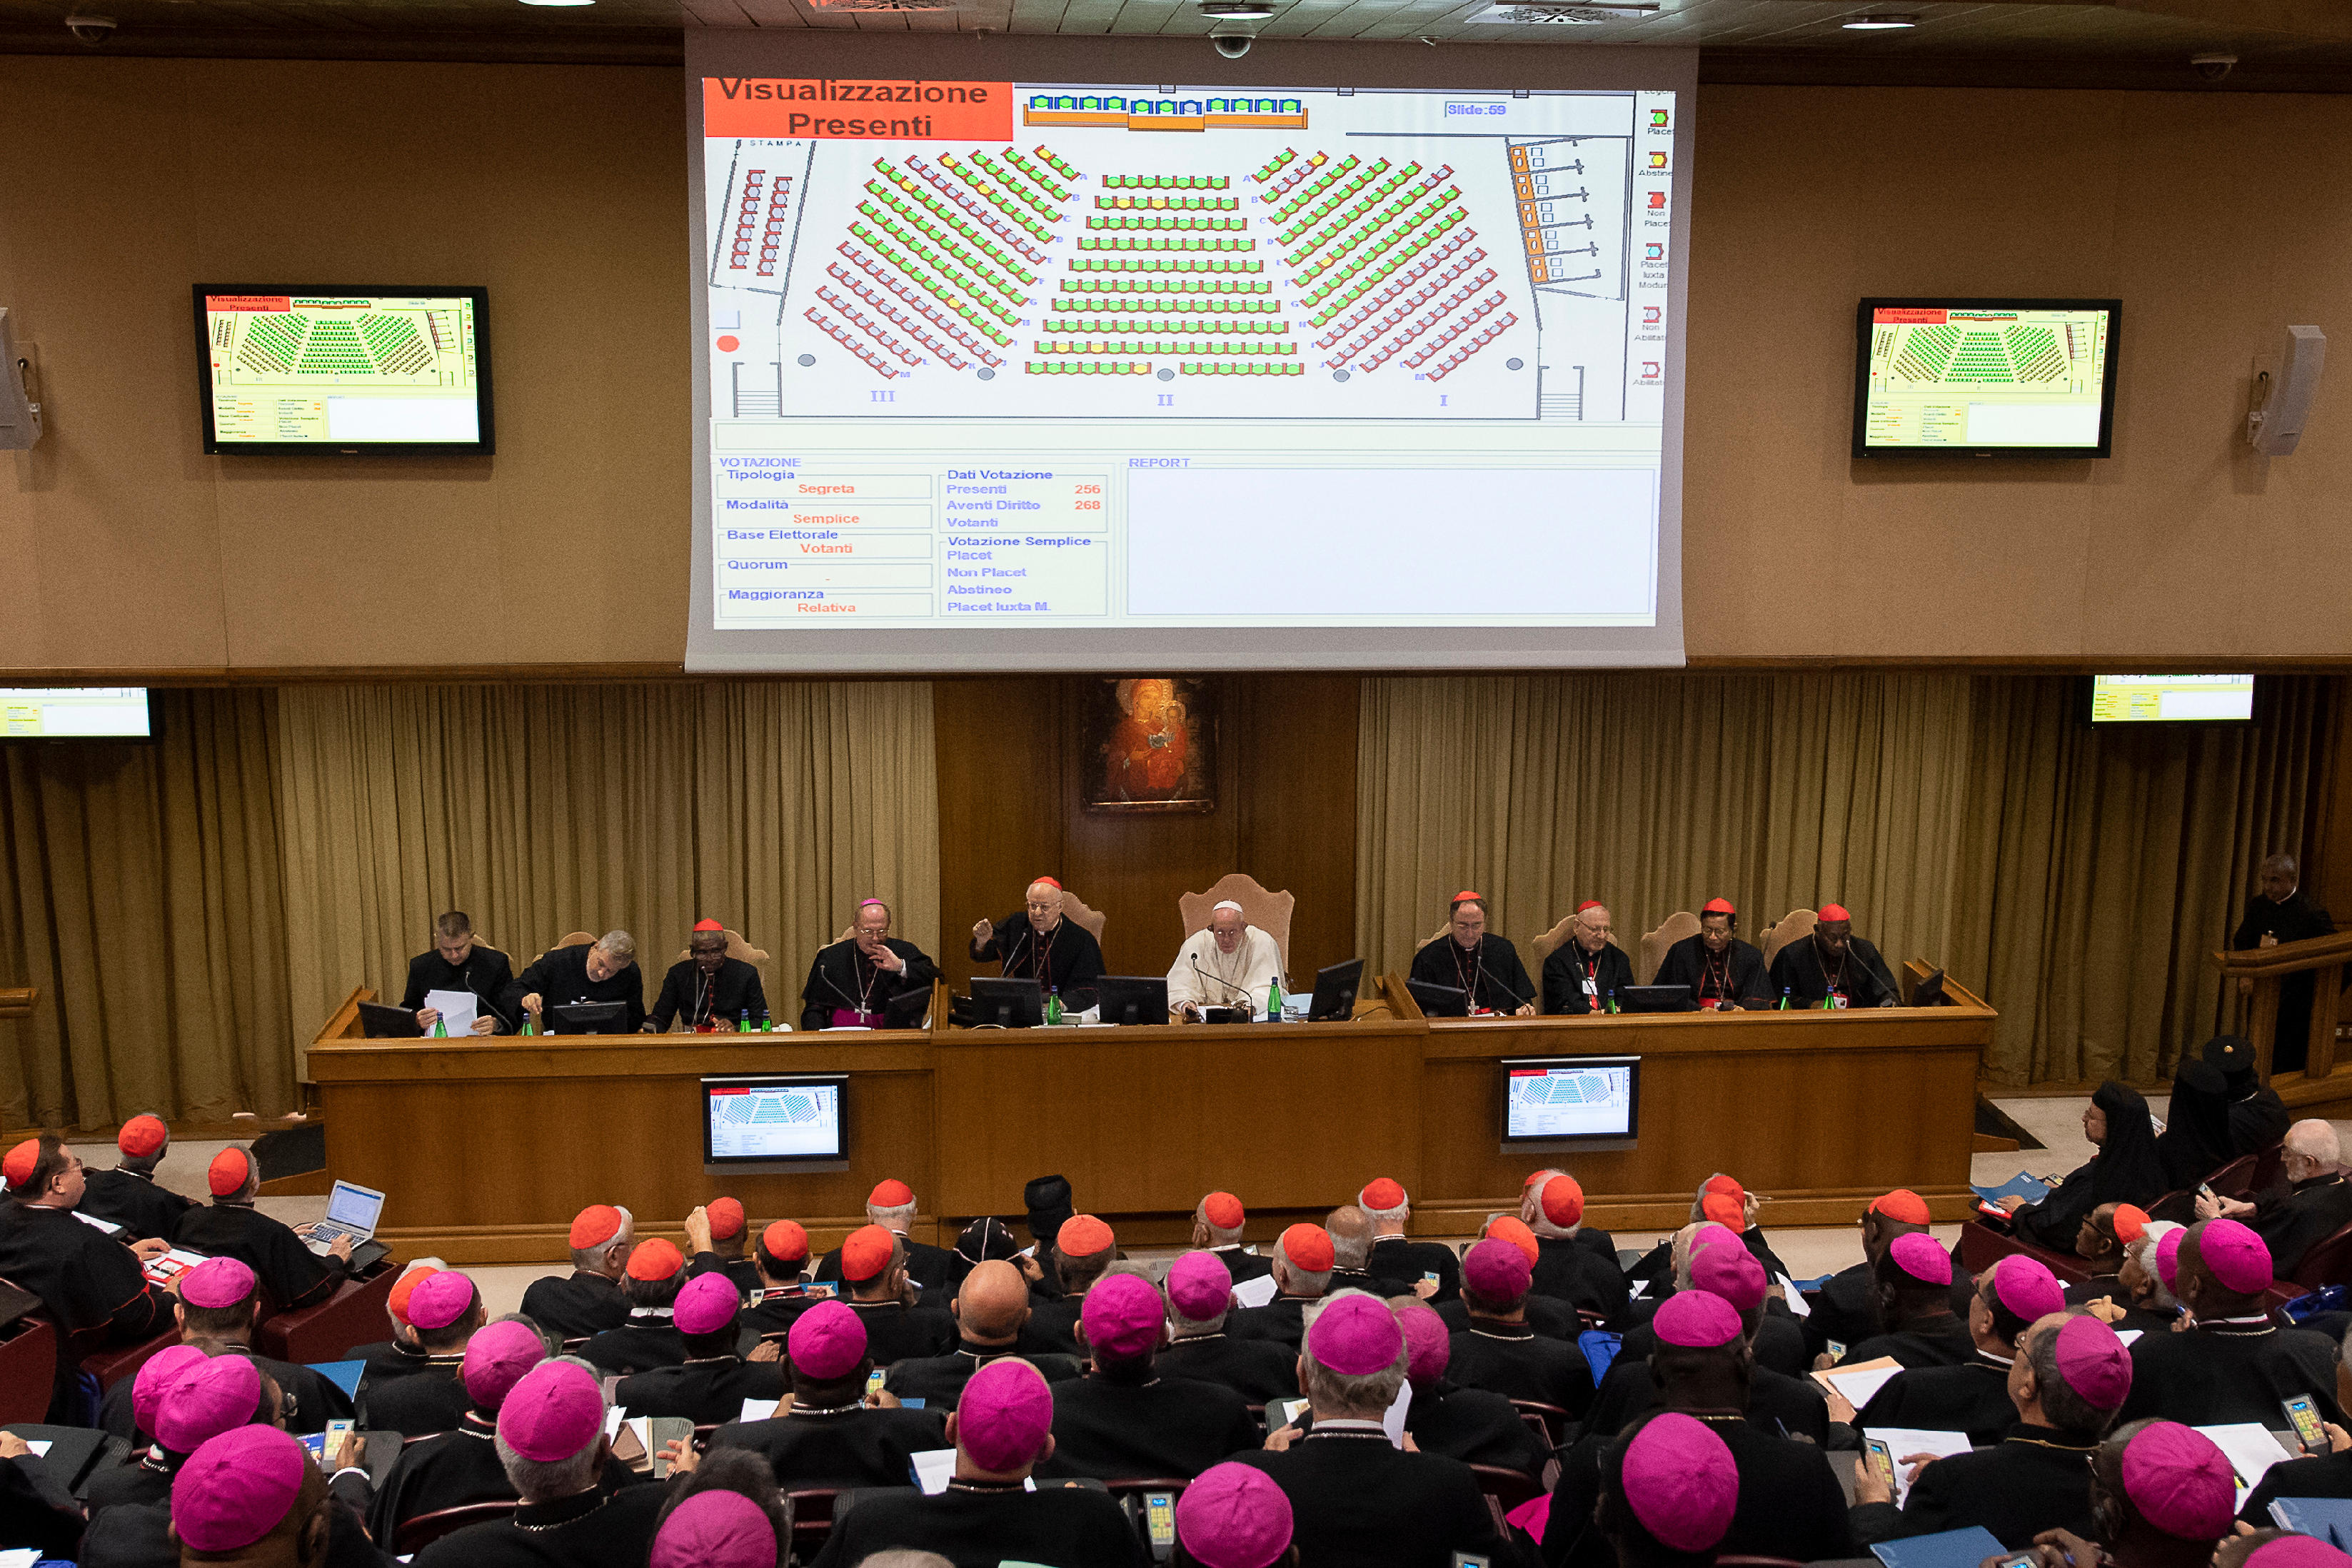 Pope chooses 'synodality' as next synod theme